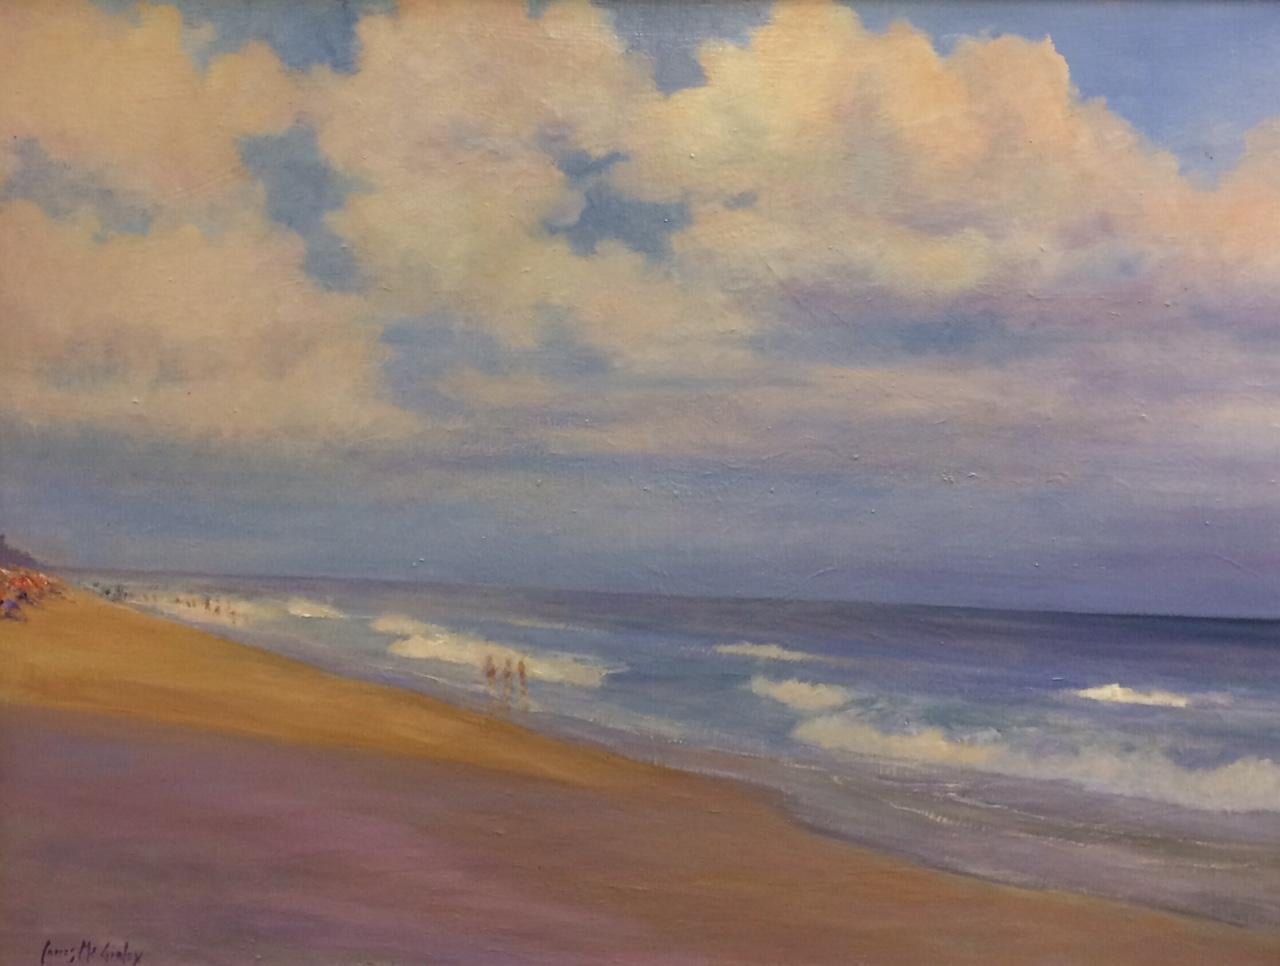 A Walk on the Beach, original 30x40 contemporary landscape - Painting by James McGinley